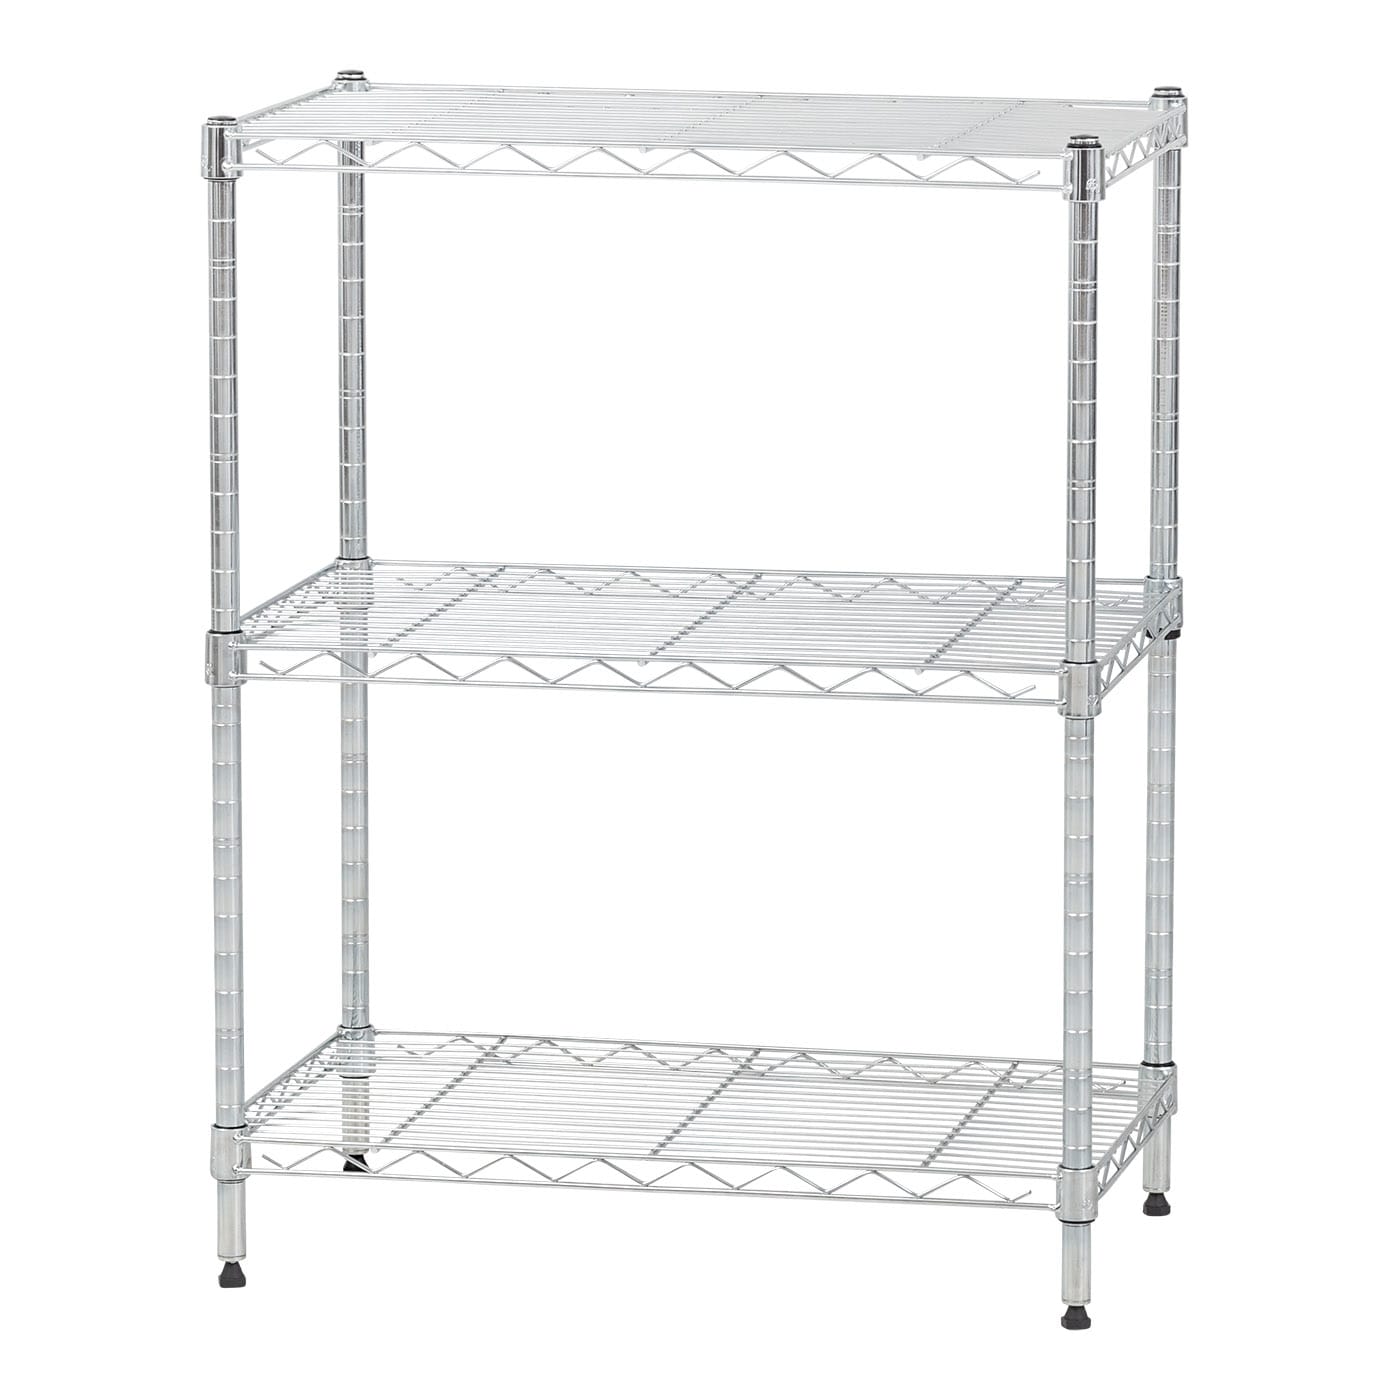 3 Tier Wire Utility Shelving Unit, 24 Inch Wire Shelving Units